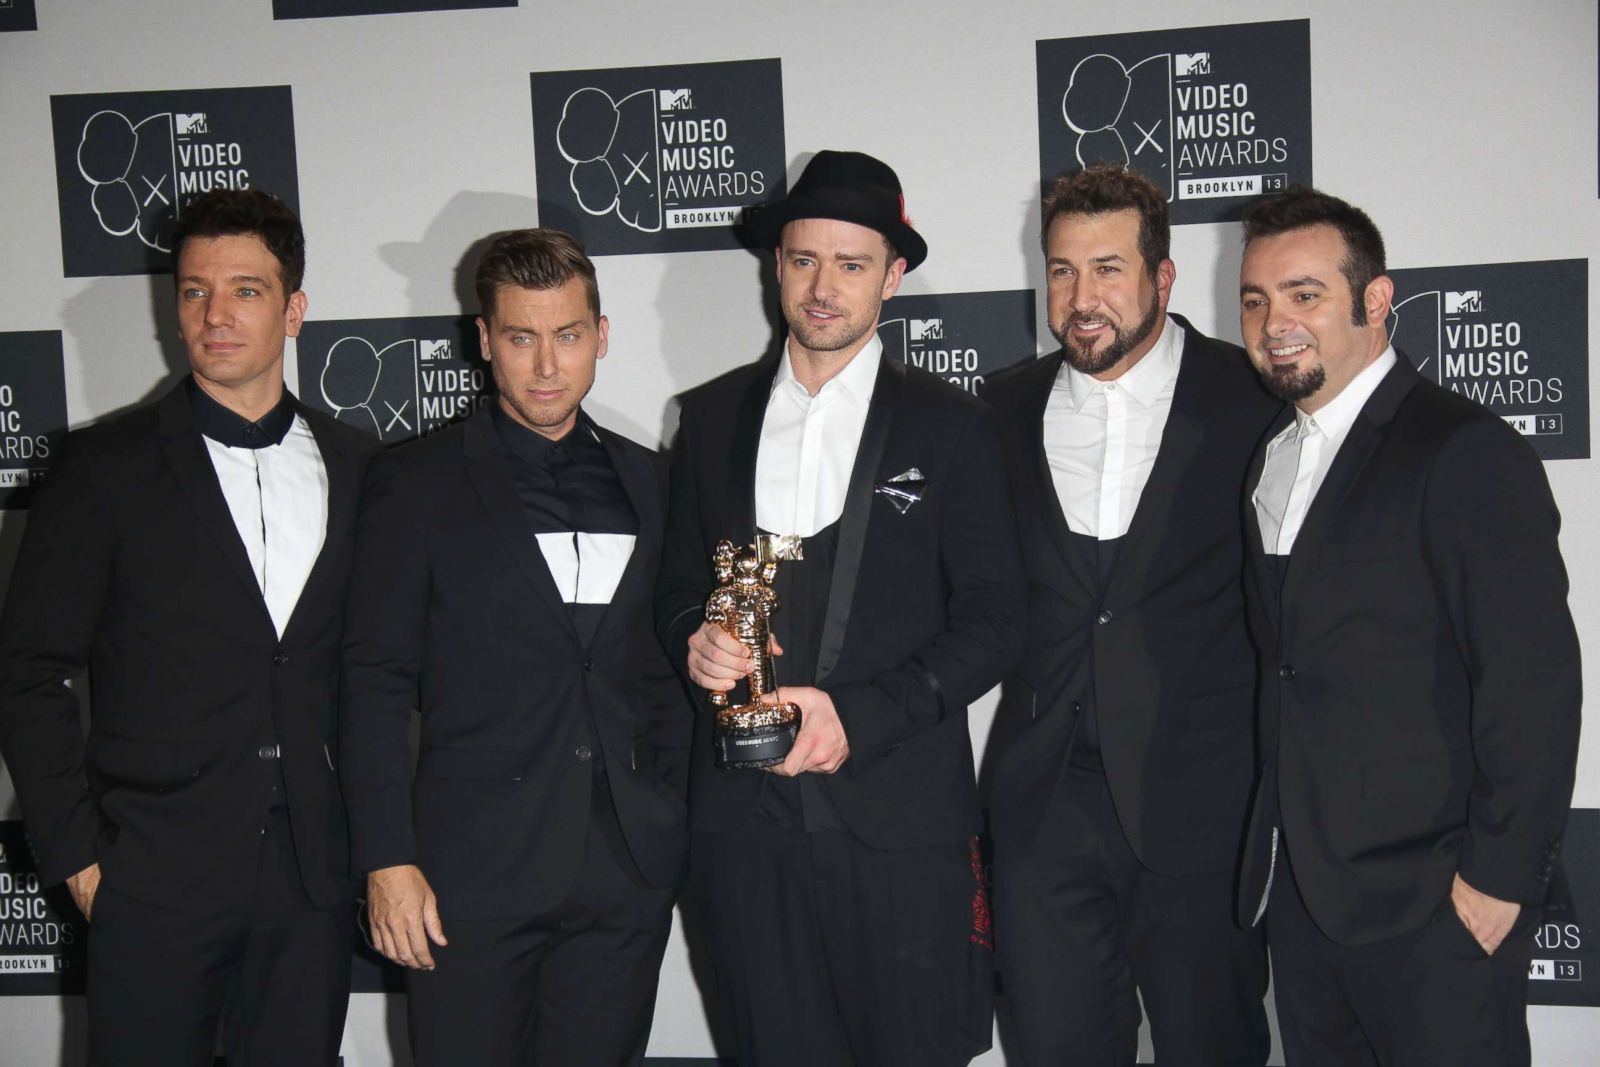 PHOTO: Left to right; JC Chasez, Lance Bass, Justin Timberlake, Joey Fatone and Chris Kirkpatrick of reunited band 'N Sync pose in the press room of the MTV Video Music Awards at the Barclays Center in Brooklyn, Aug. 25, 2013.